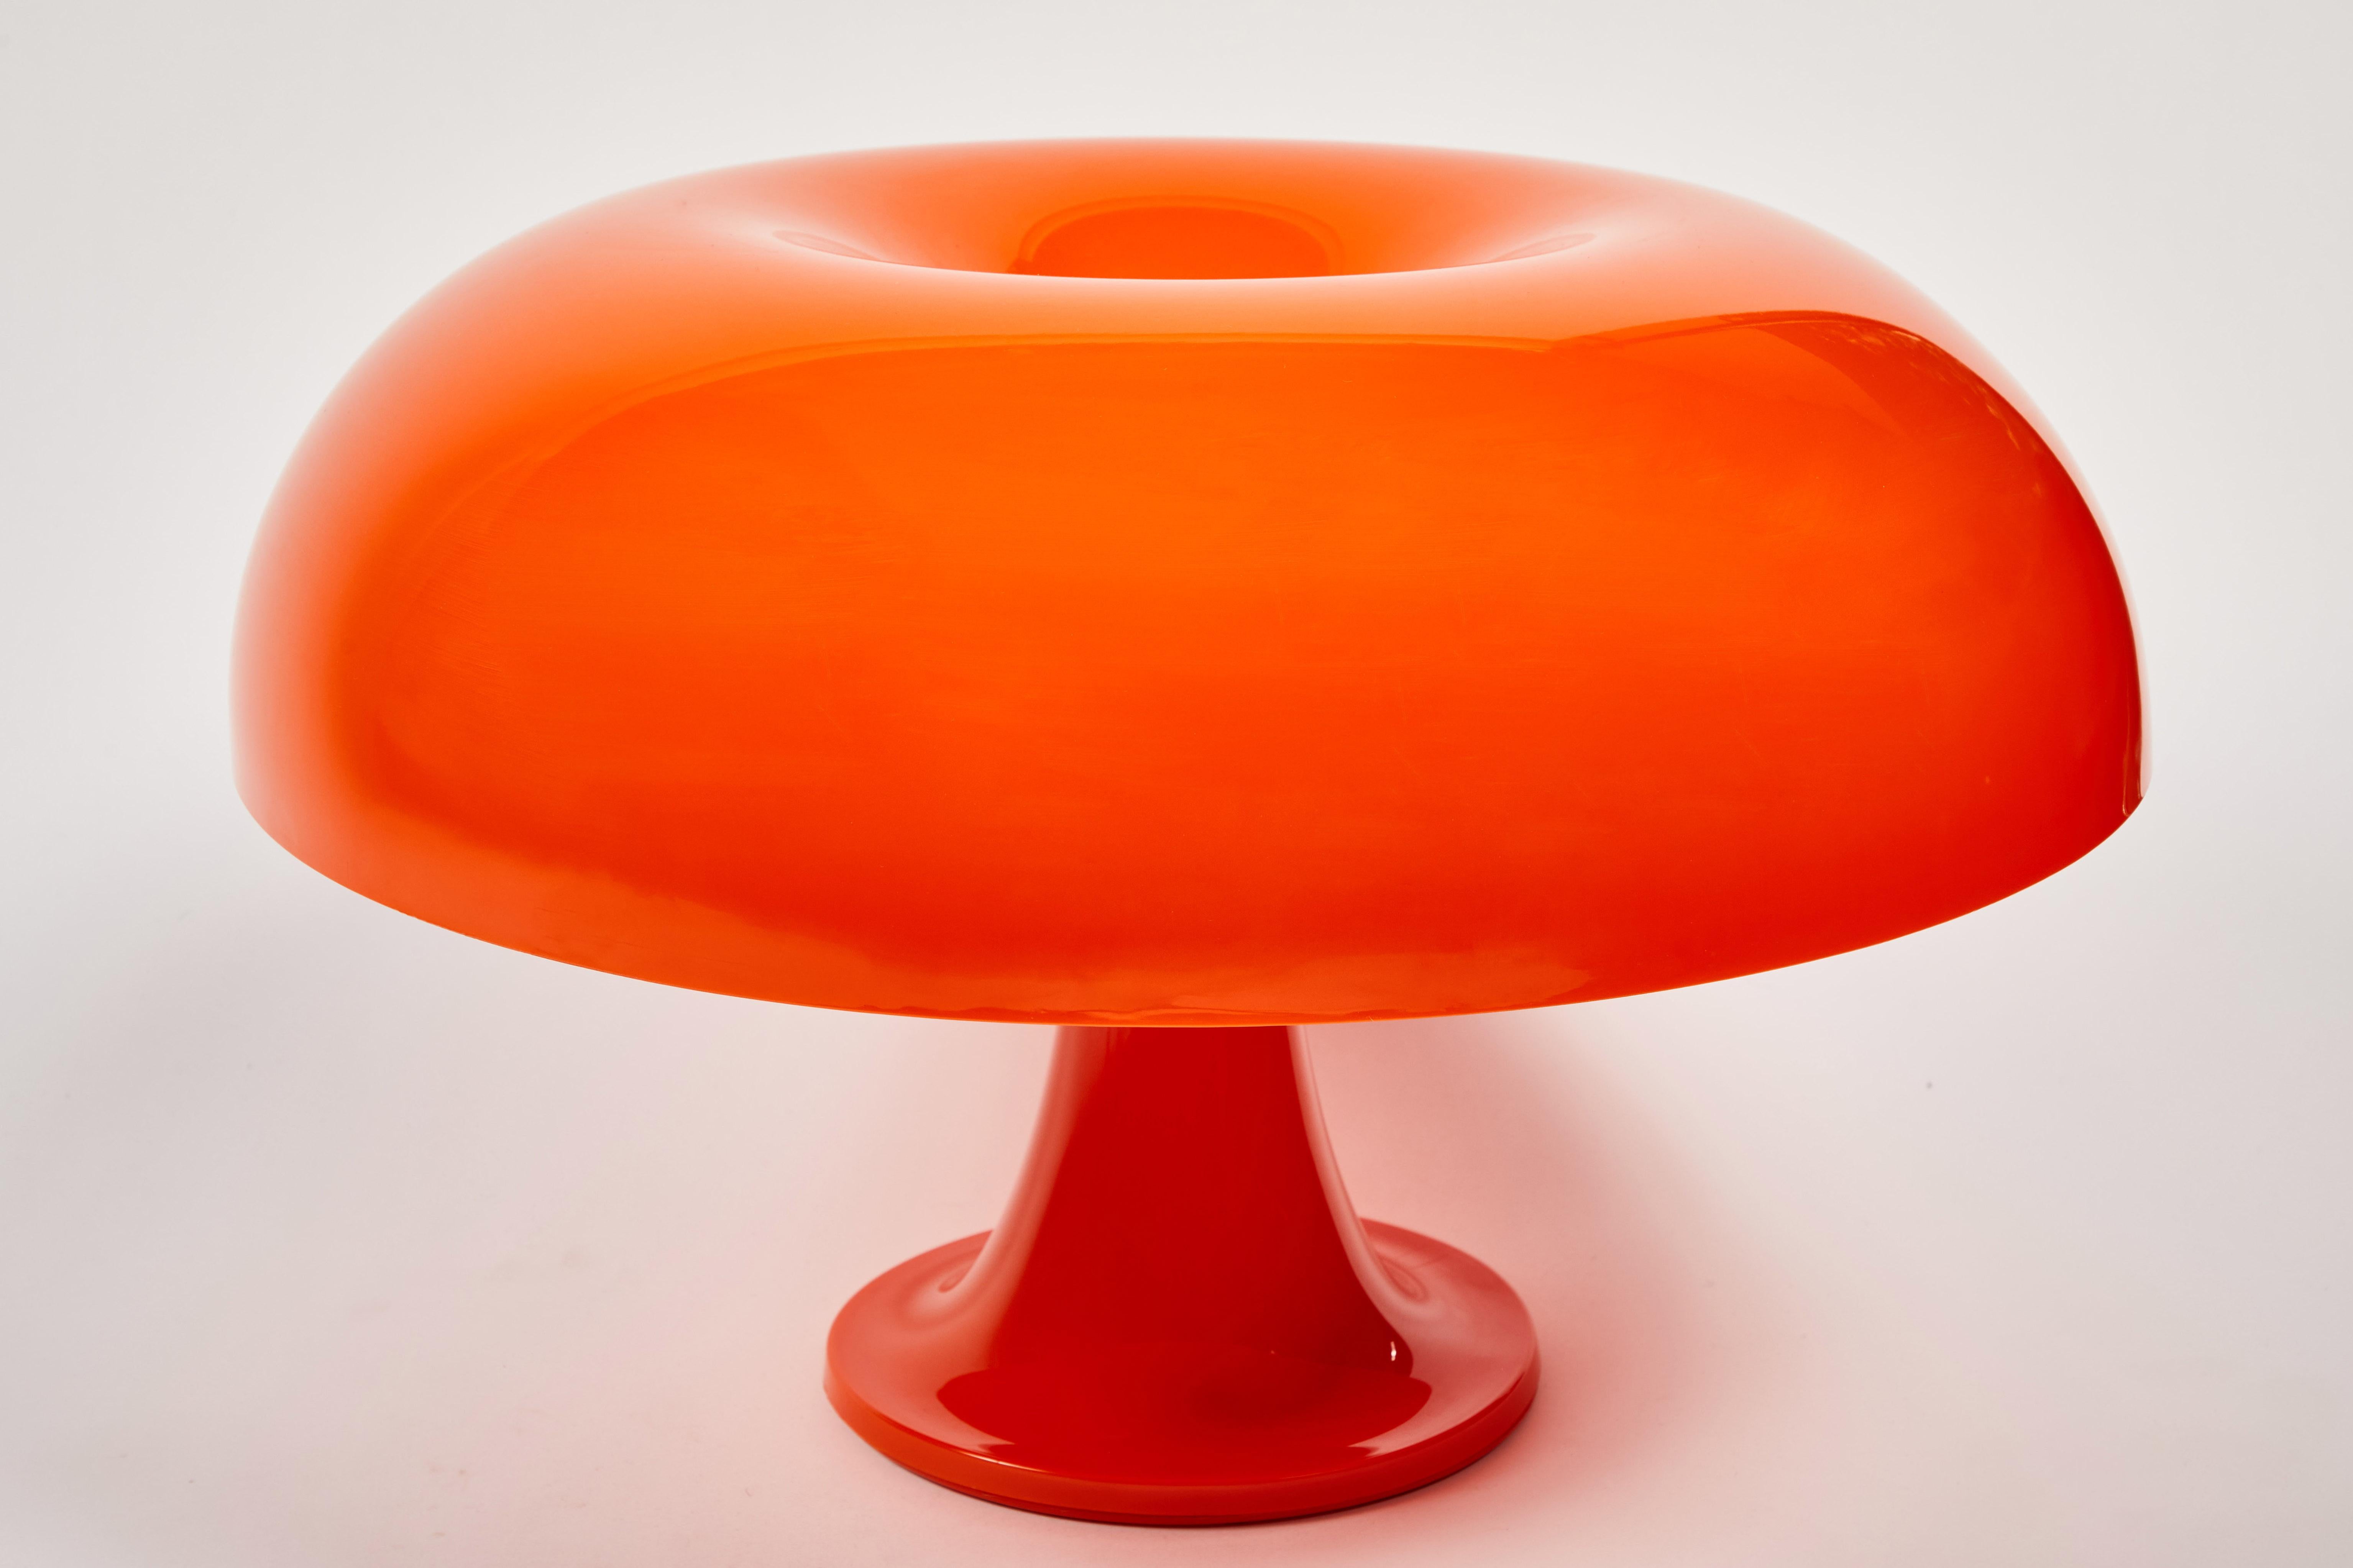 Vintage 'Nesso' table lamp re-configured to be a flush mount fixture by Giancarlo Mattioli for Artemide. Shade and base made from injection-molded ABS resin, made in Italy. In overall good condition.